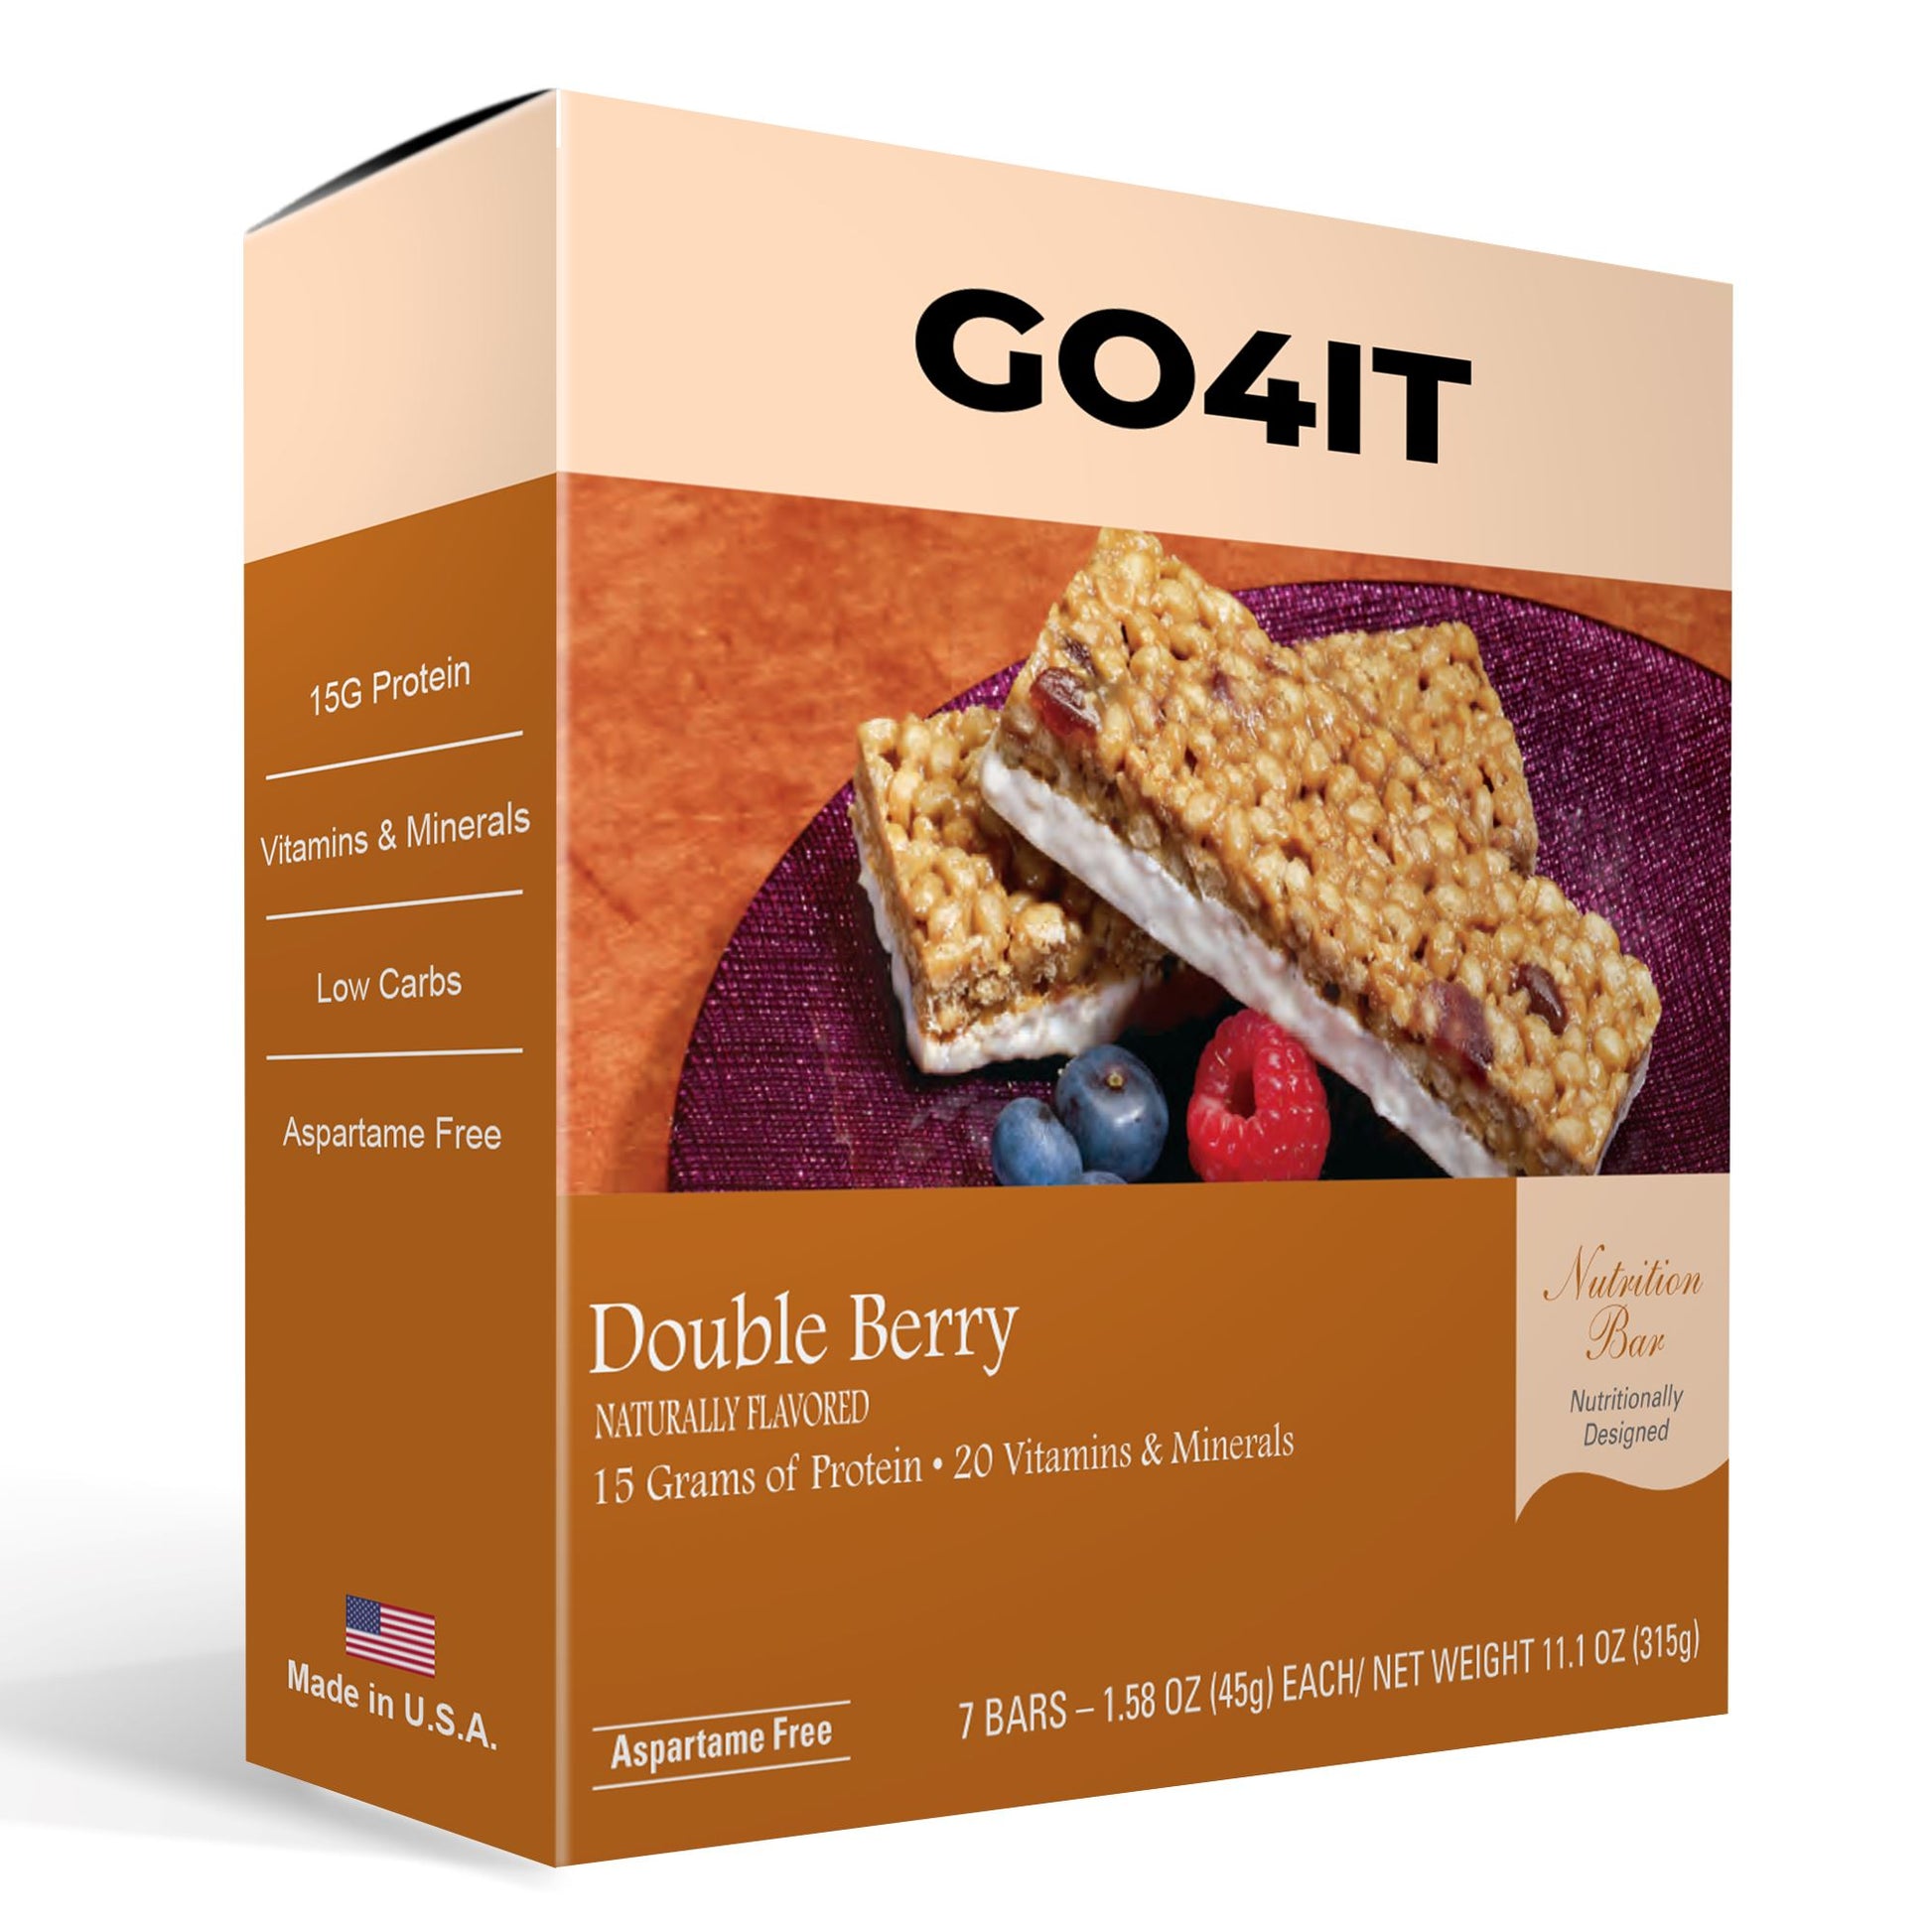 Double Berry Meal Replacement Bar by GO4IT Health. Healthy Kosher Protein bar with low calories and low carbs